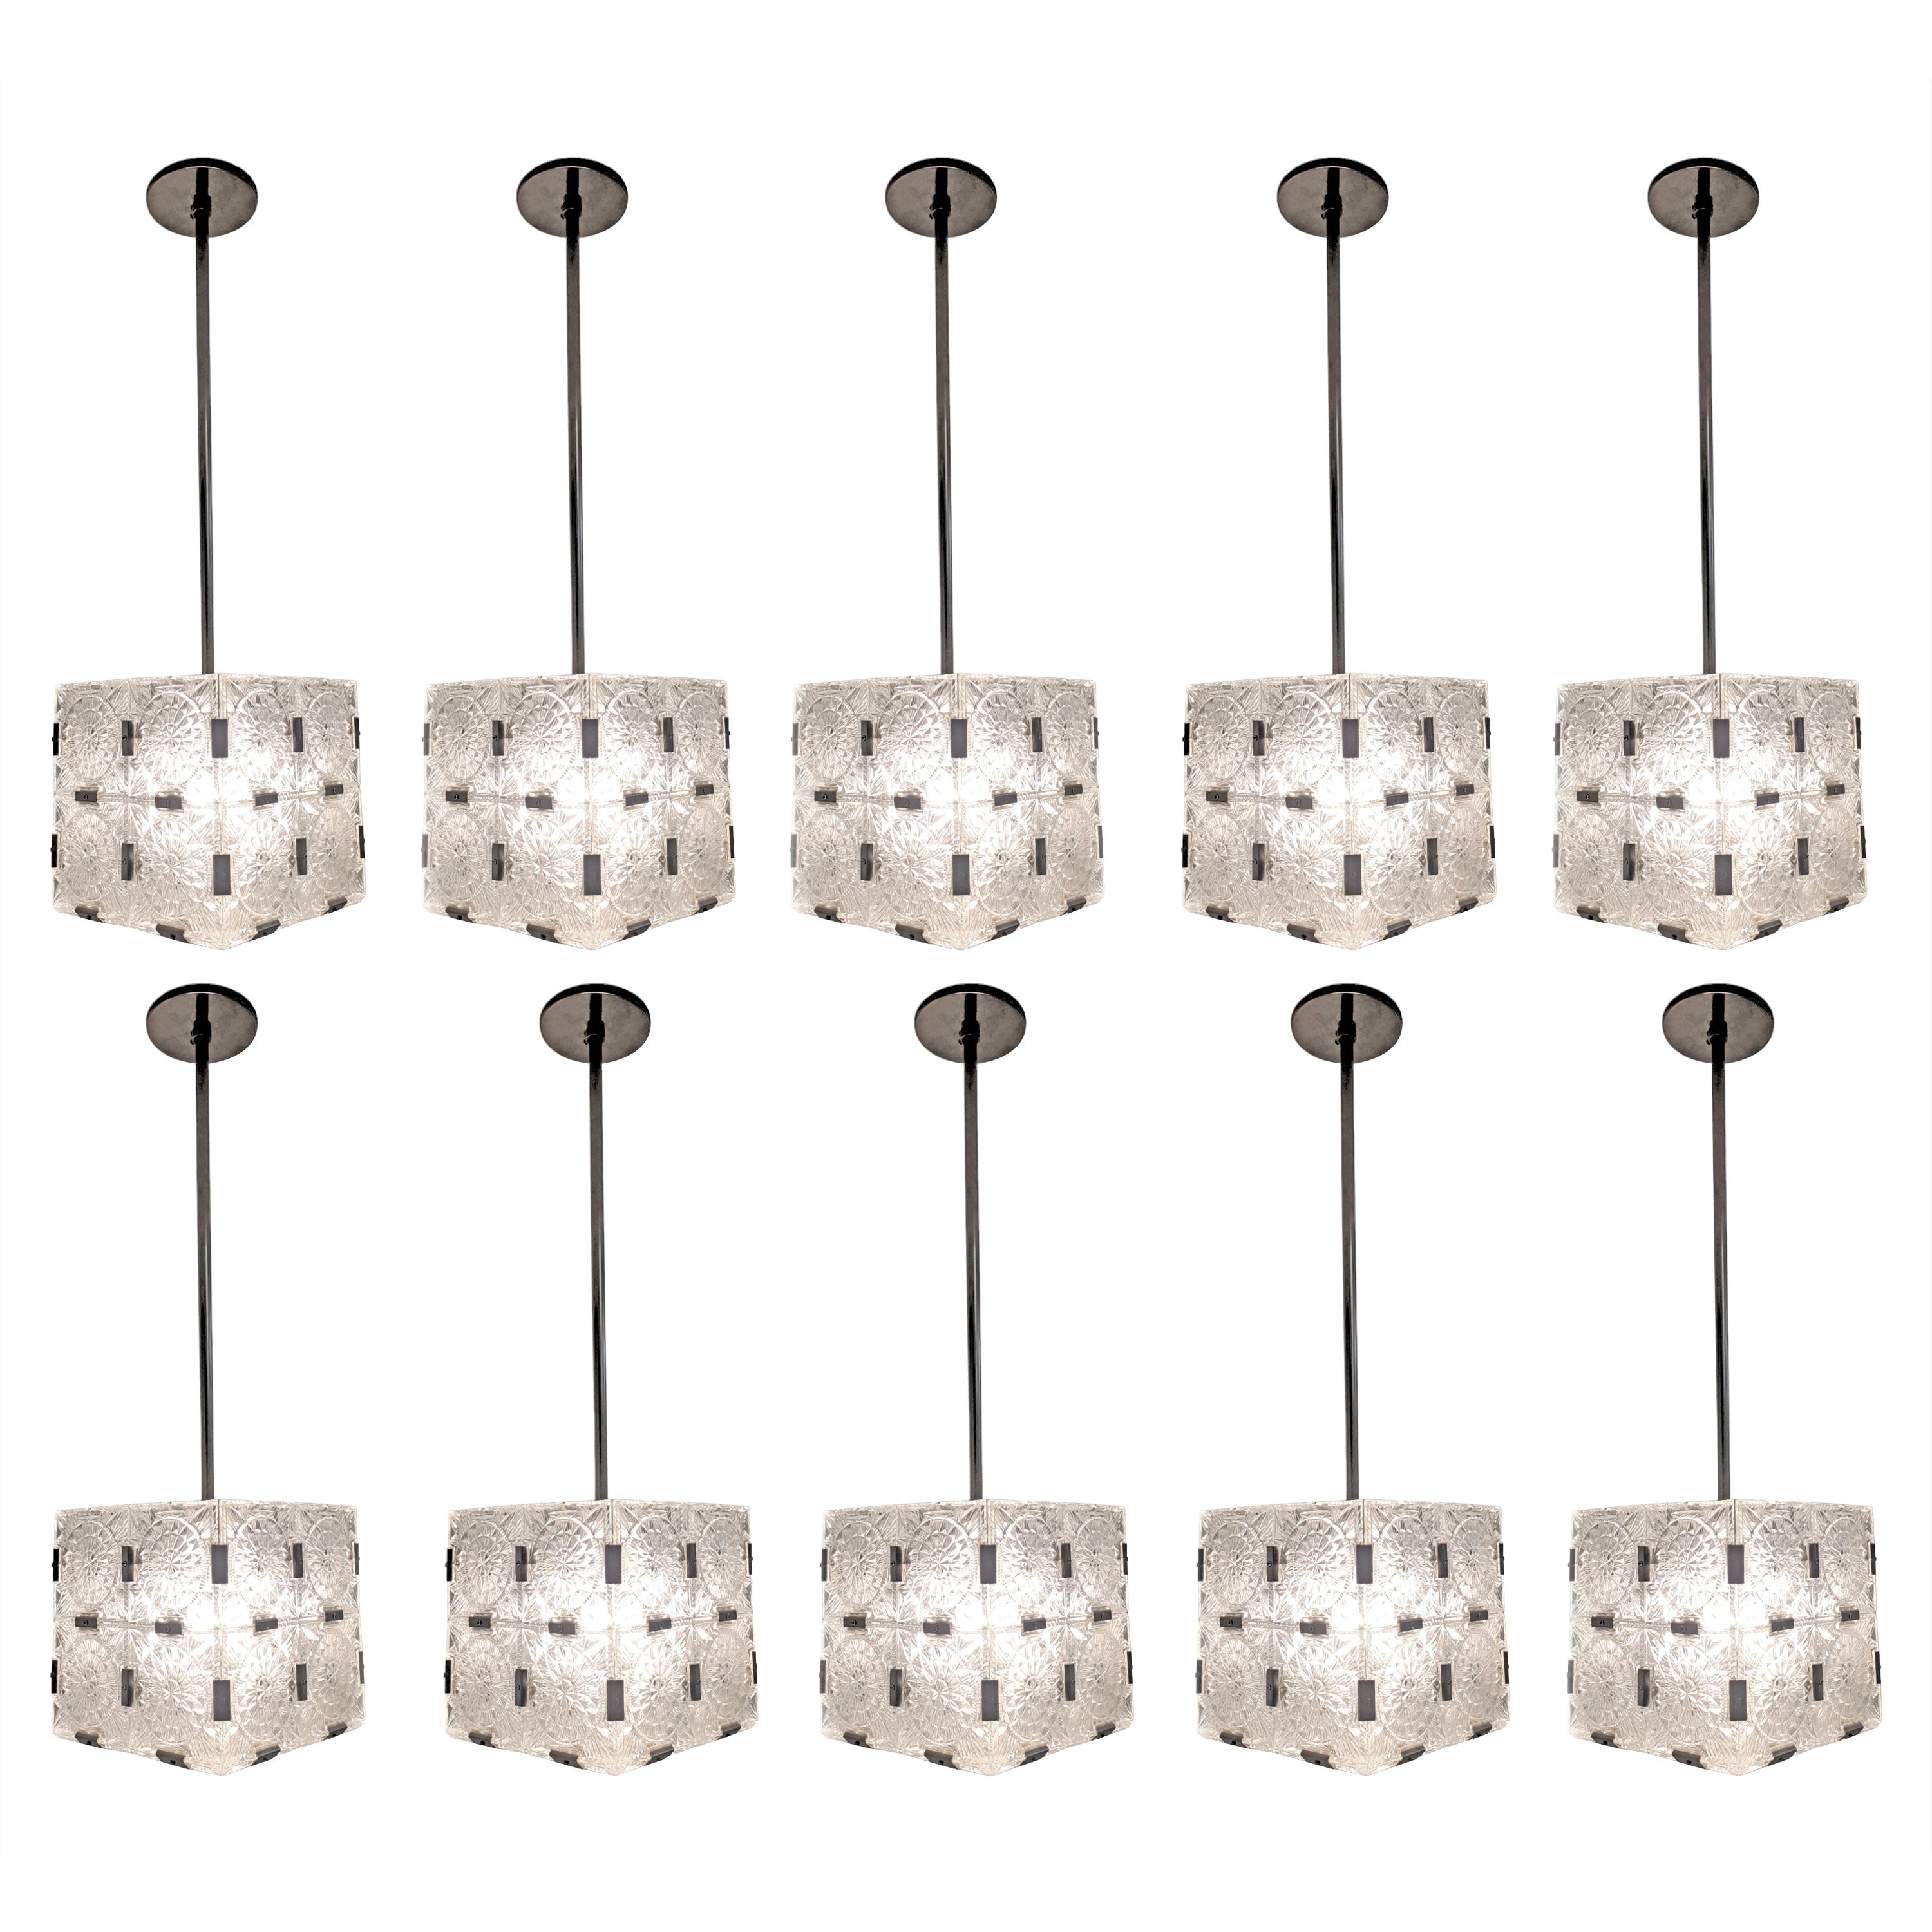 Set of Ten Original Box Cube Pendant Lights, Glass with Nickeled Clips For Sale